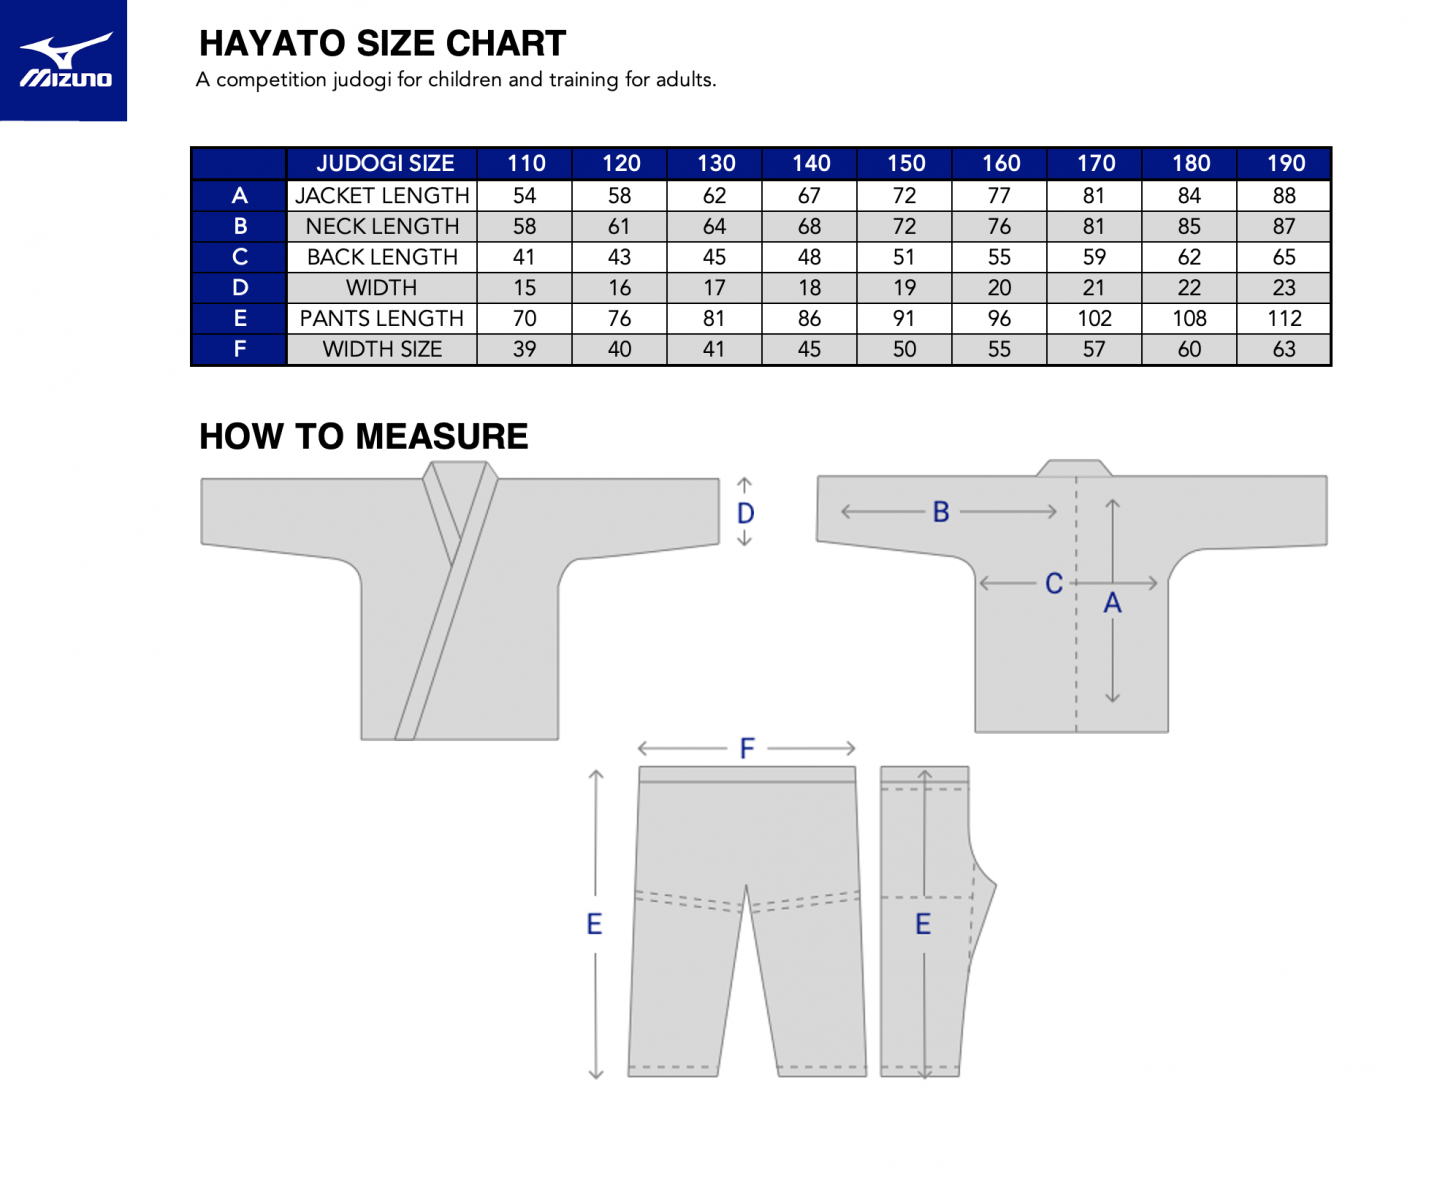 Handy sizing guide for Fuji Sports uniforms